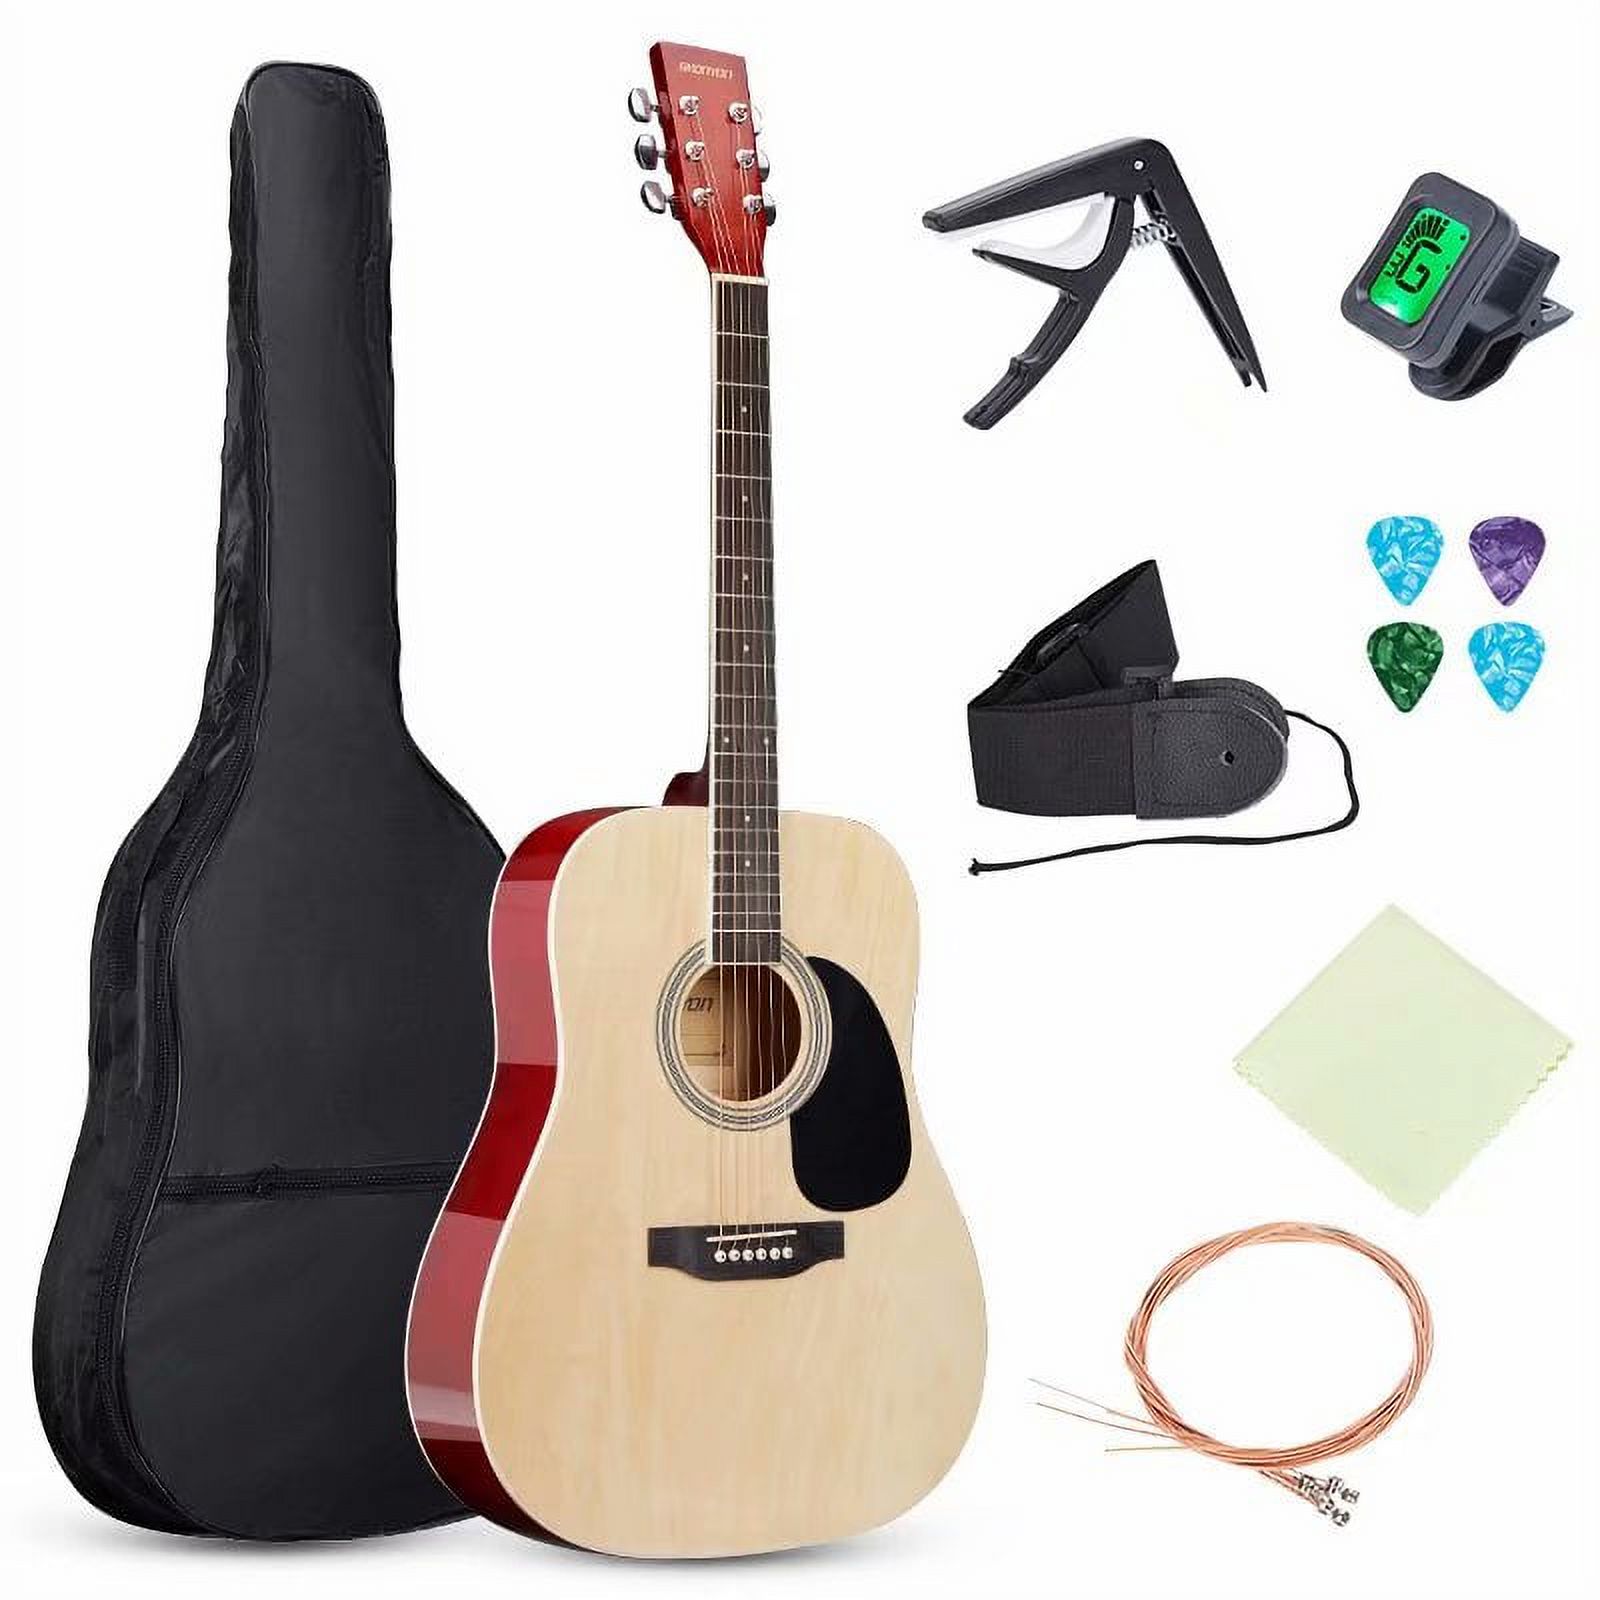 YouYeap 41" All-Wood Acoustic Guitar Starter Level Kit with Gig Bag, E-Tuner, Pick, Strap and Rag, Natural - image 1 of 11